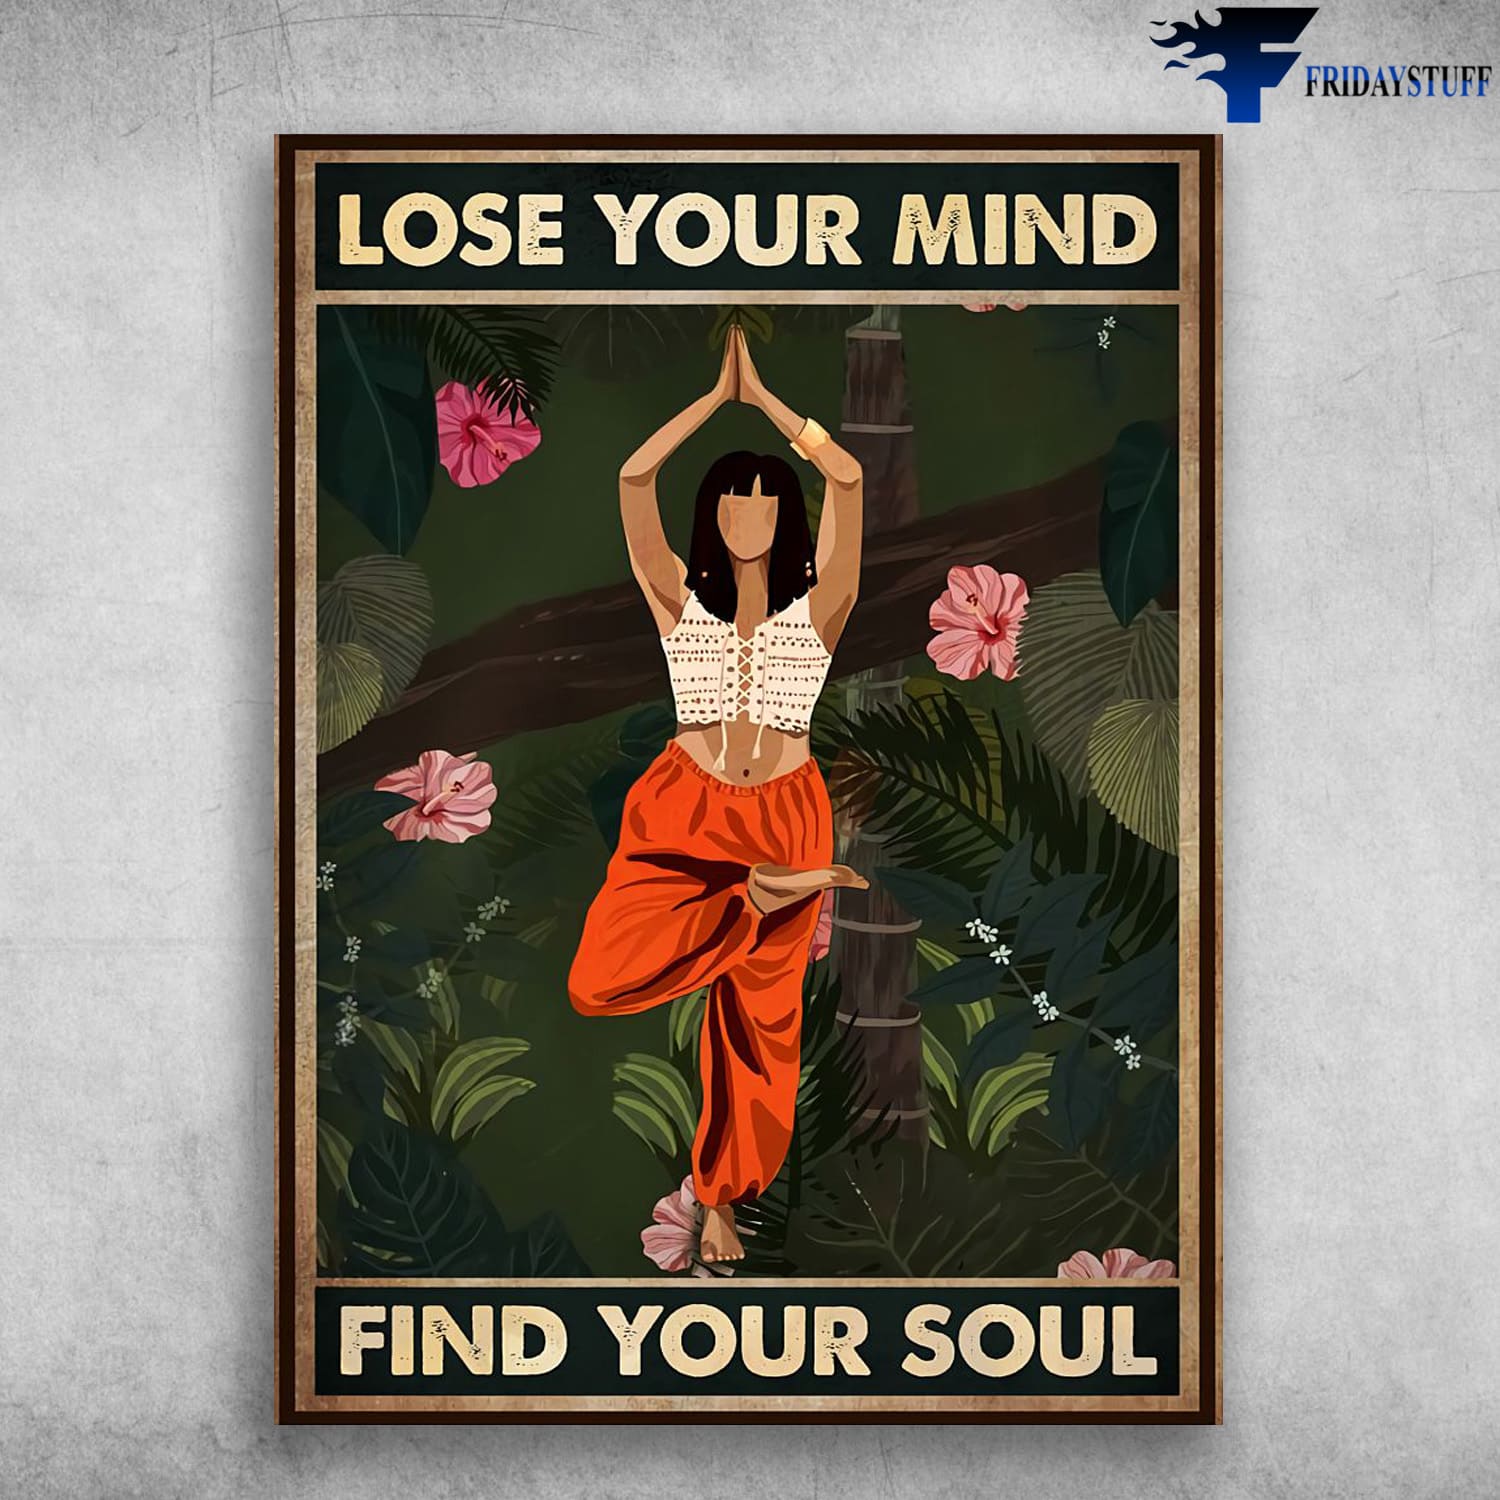 Yoga Poster, Yoga Girl, Lose Your Mind, Find Your Soul